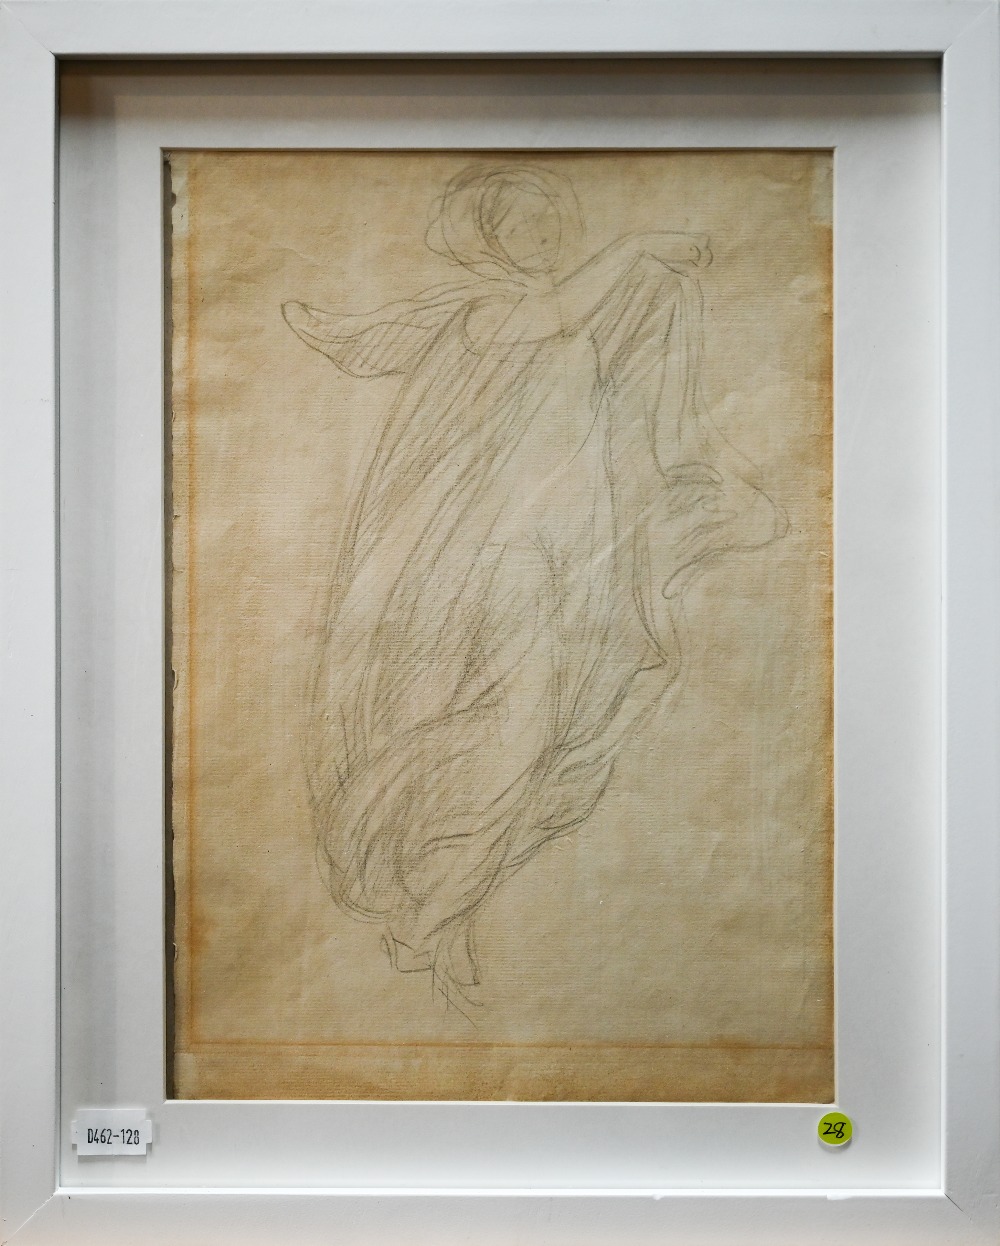 Attributed to George Romney RA (1733-1802) - 'Figure Study', pencil on laid paper with a Georgian